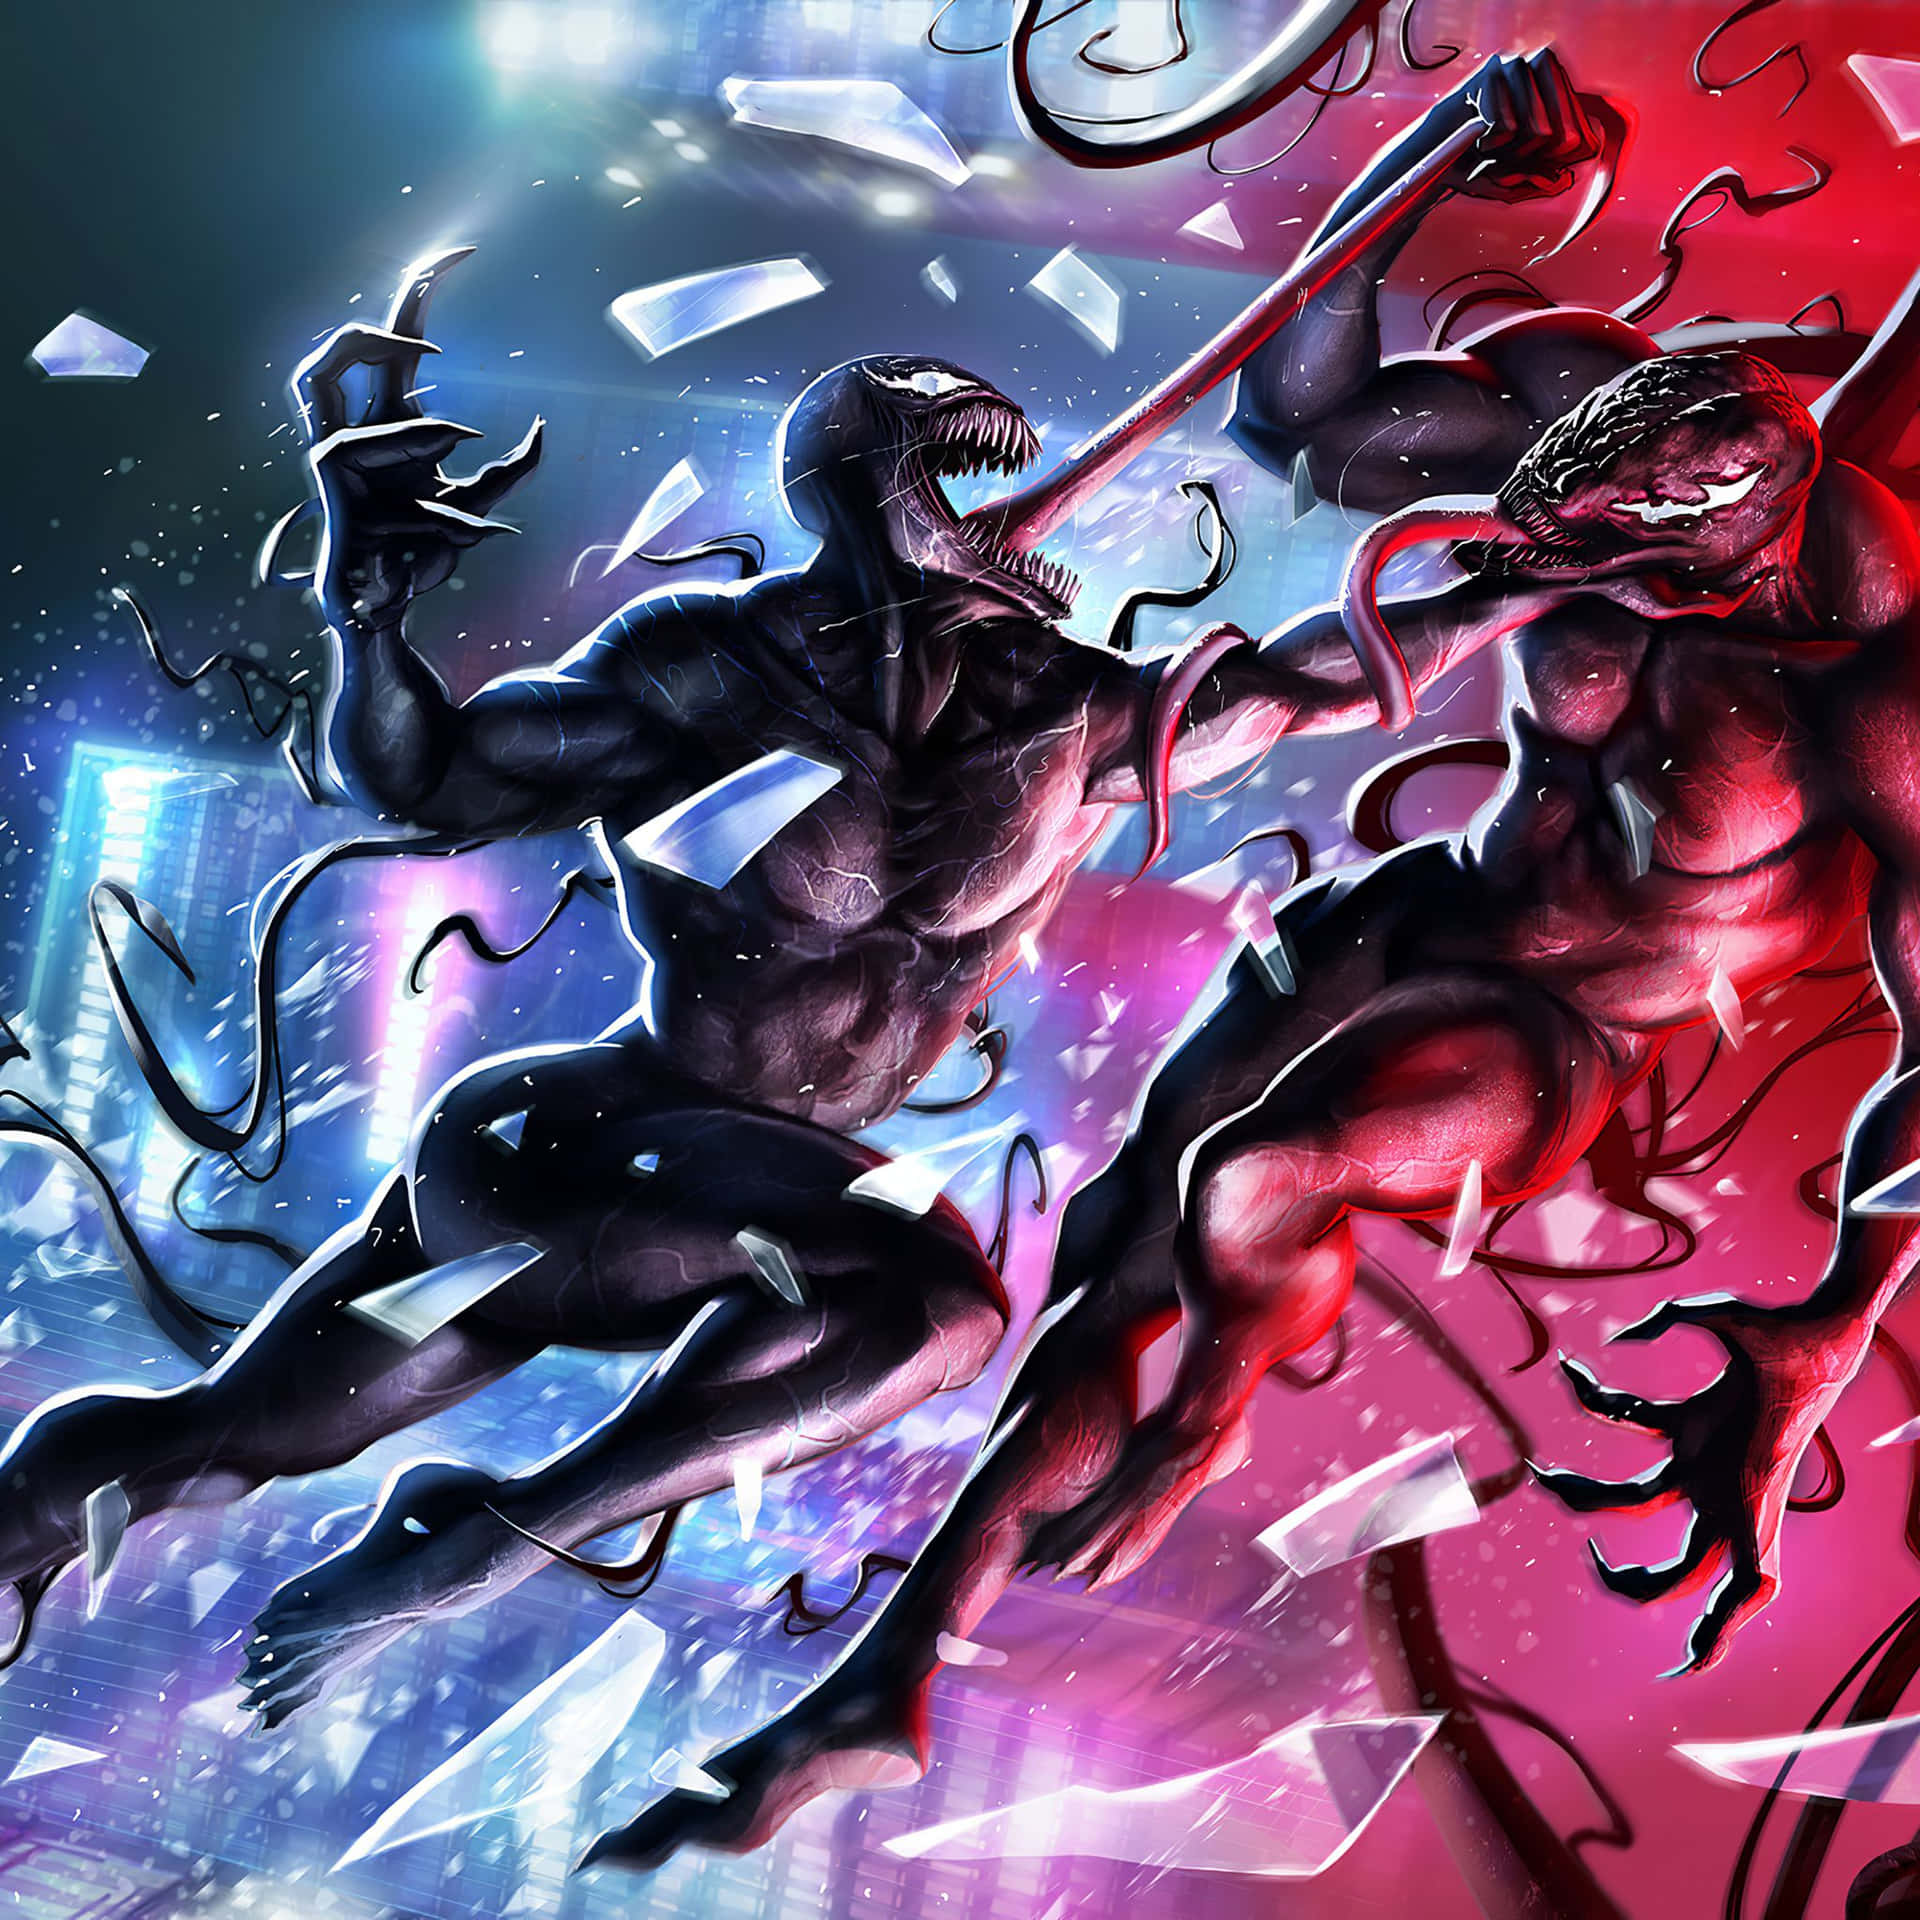 Carnage and Venom Face-Off in an Epic Battle Wallpaper